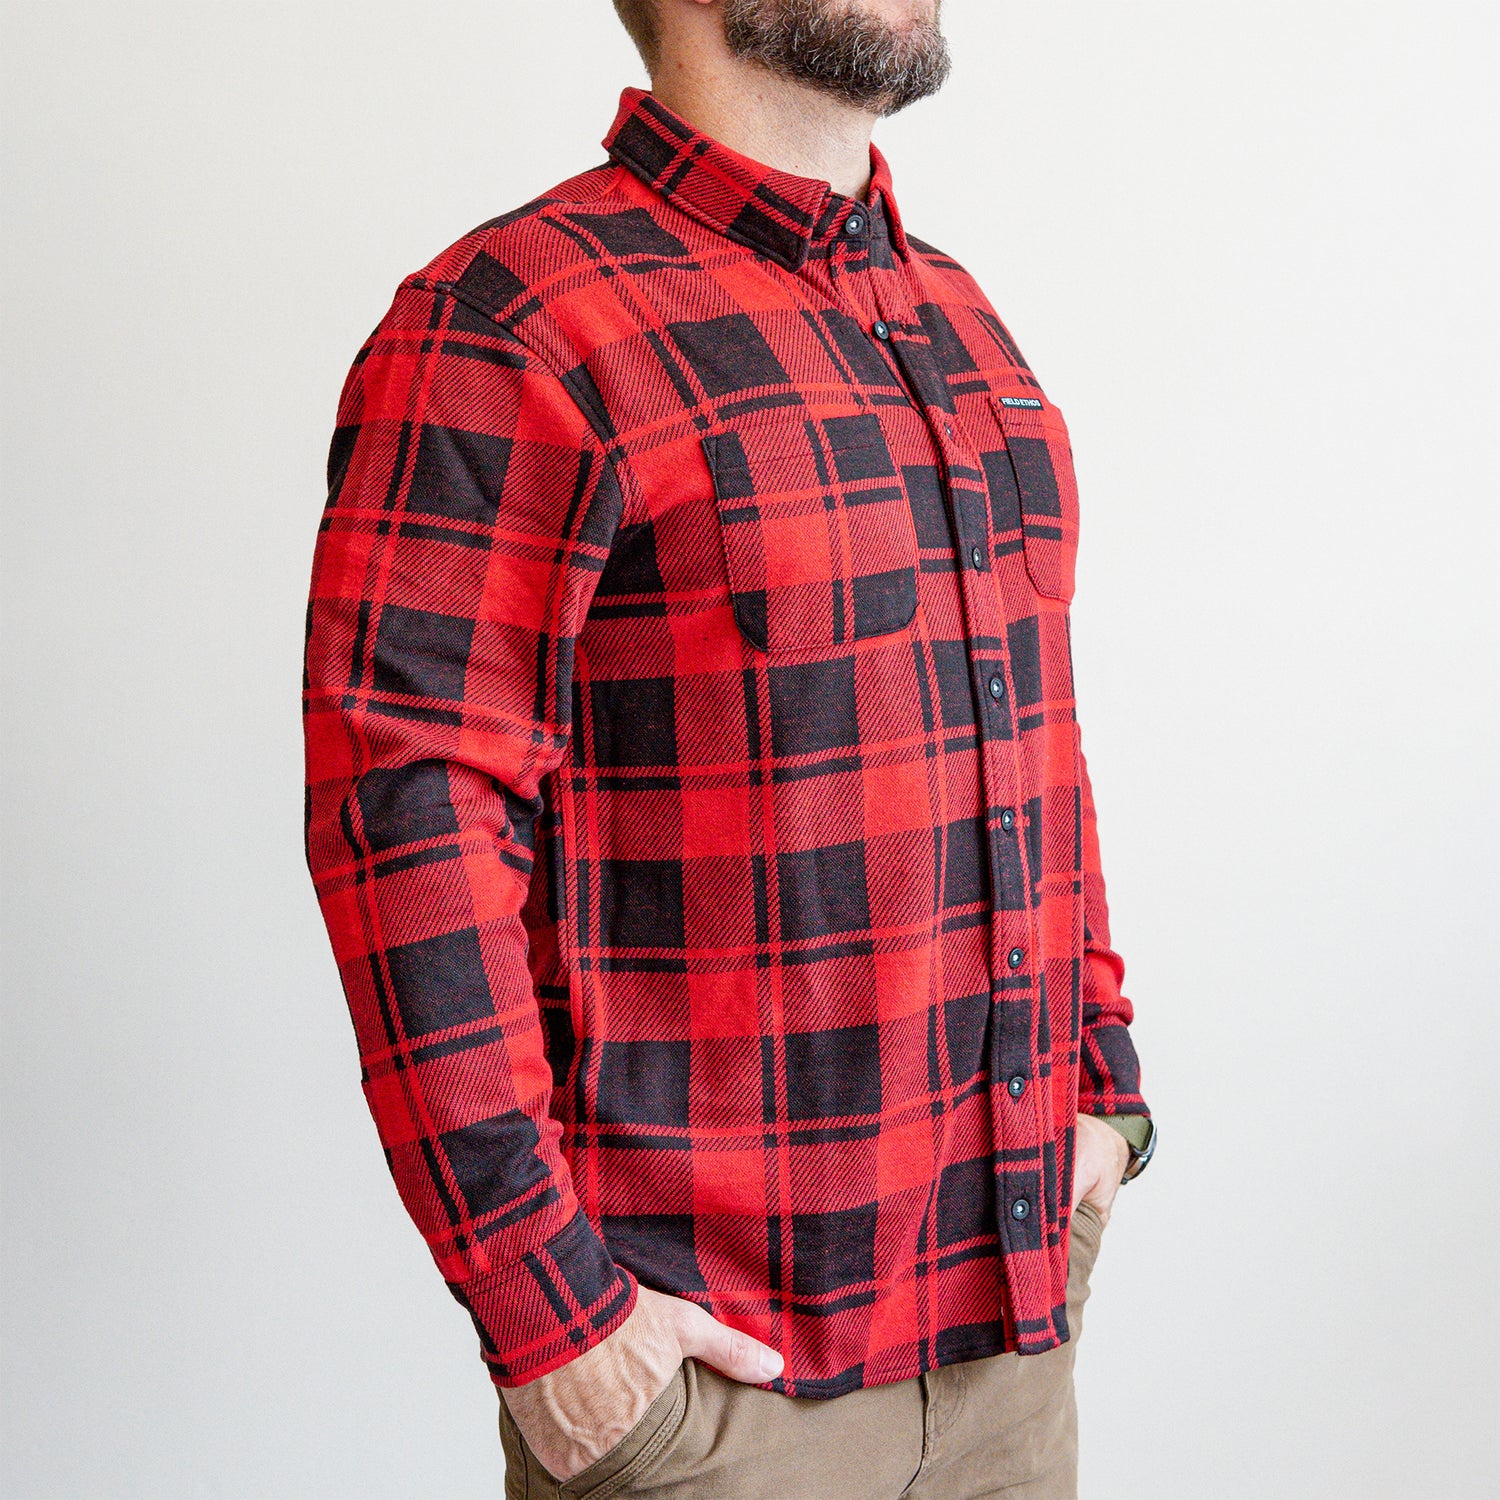 The Field Ethos Flannel Shirt